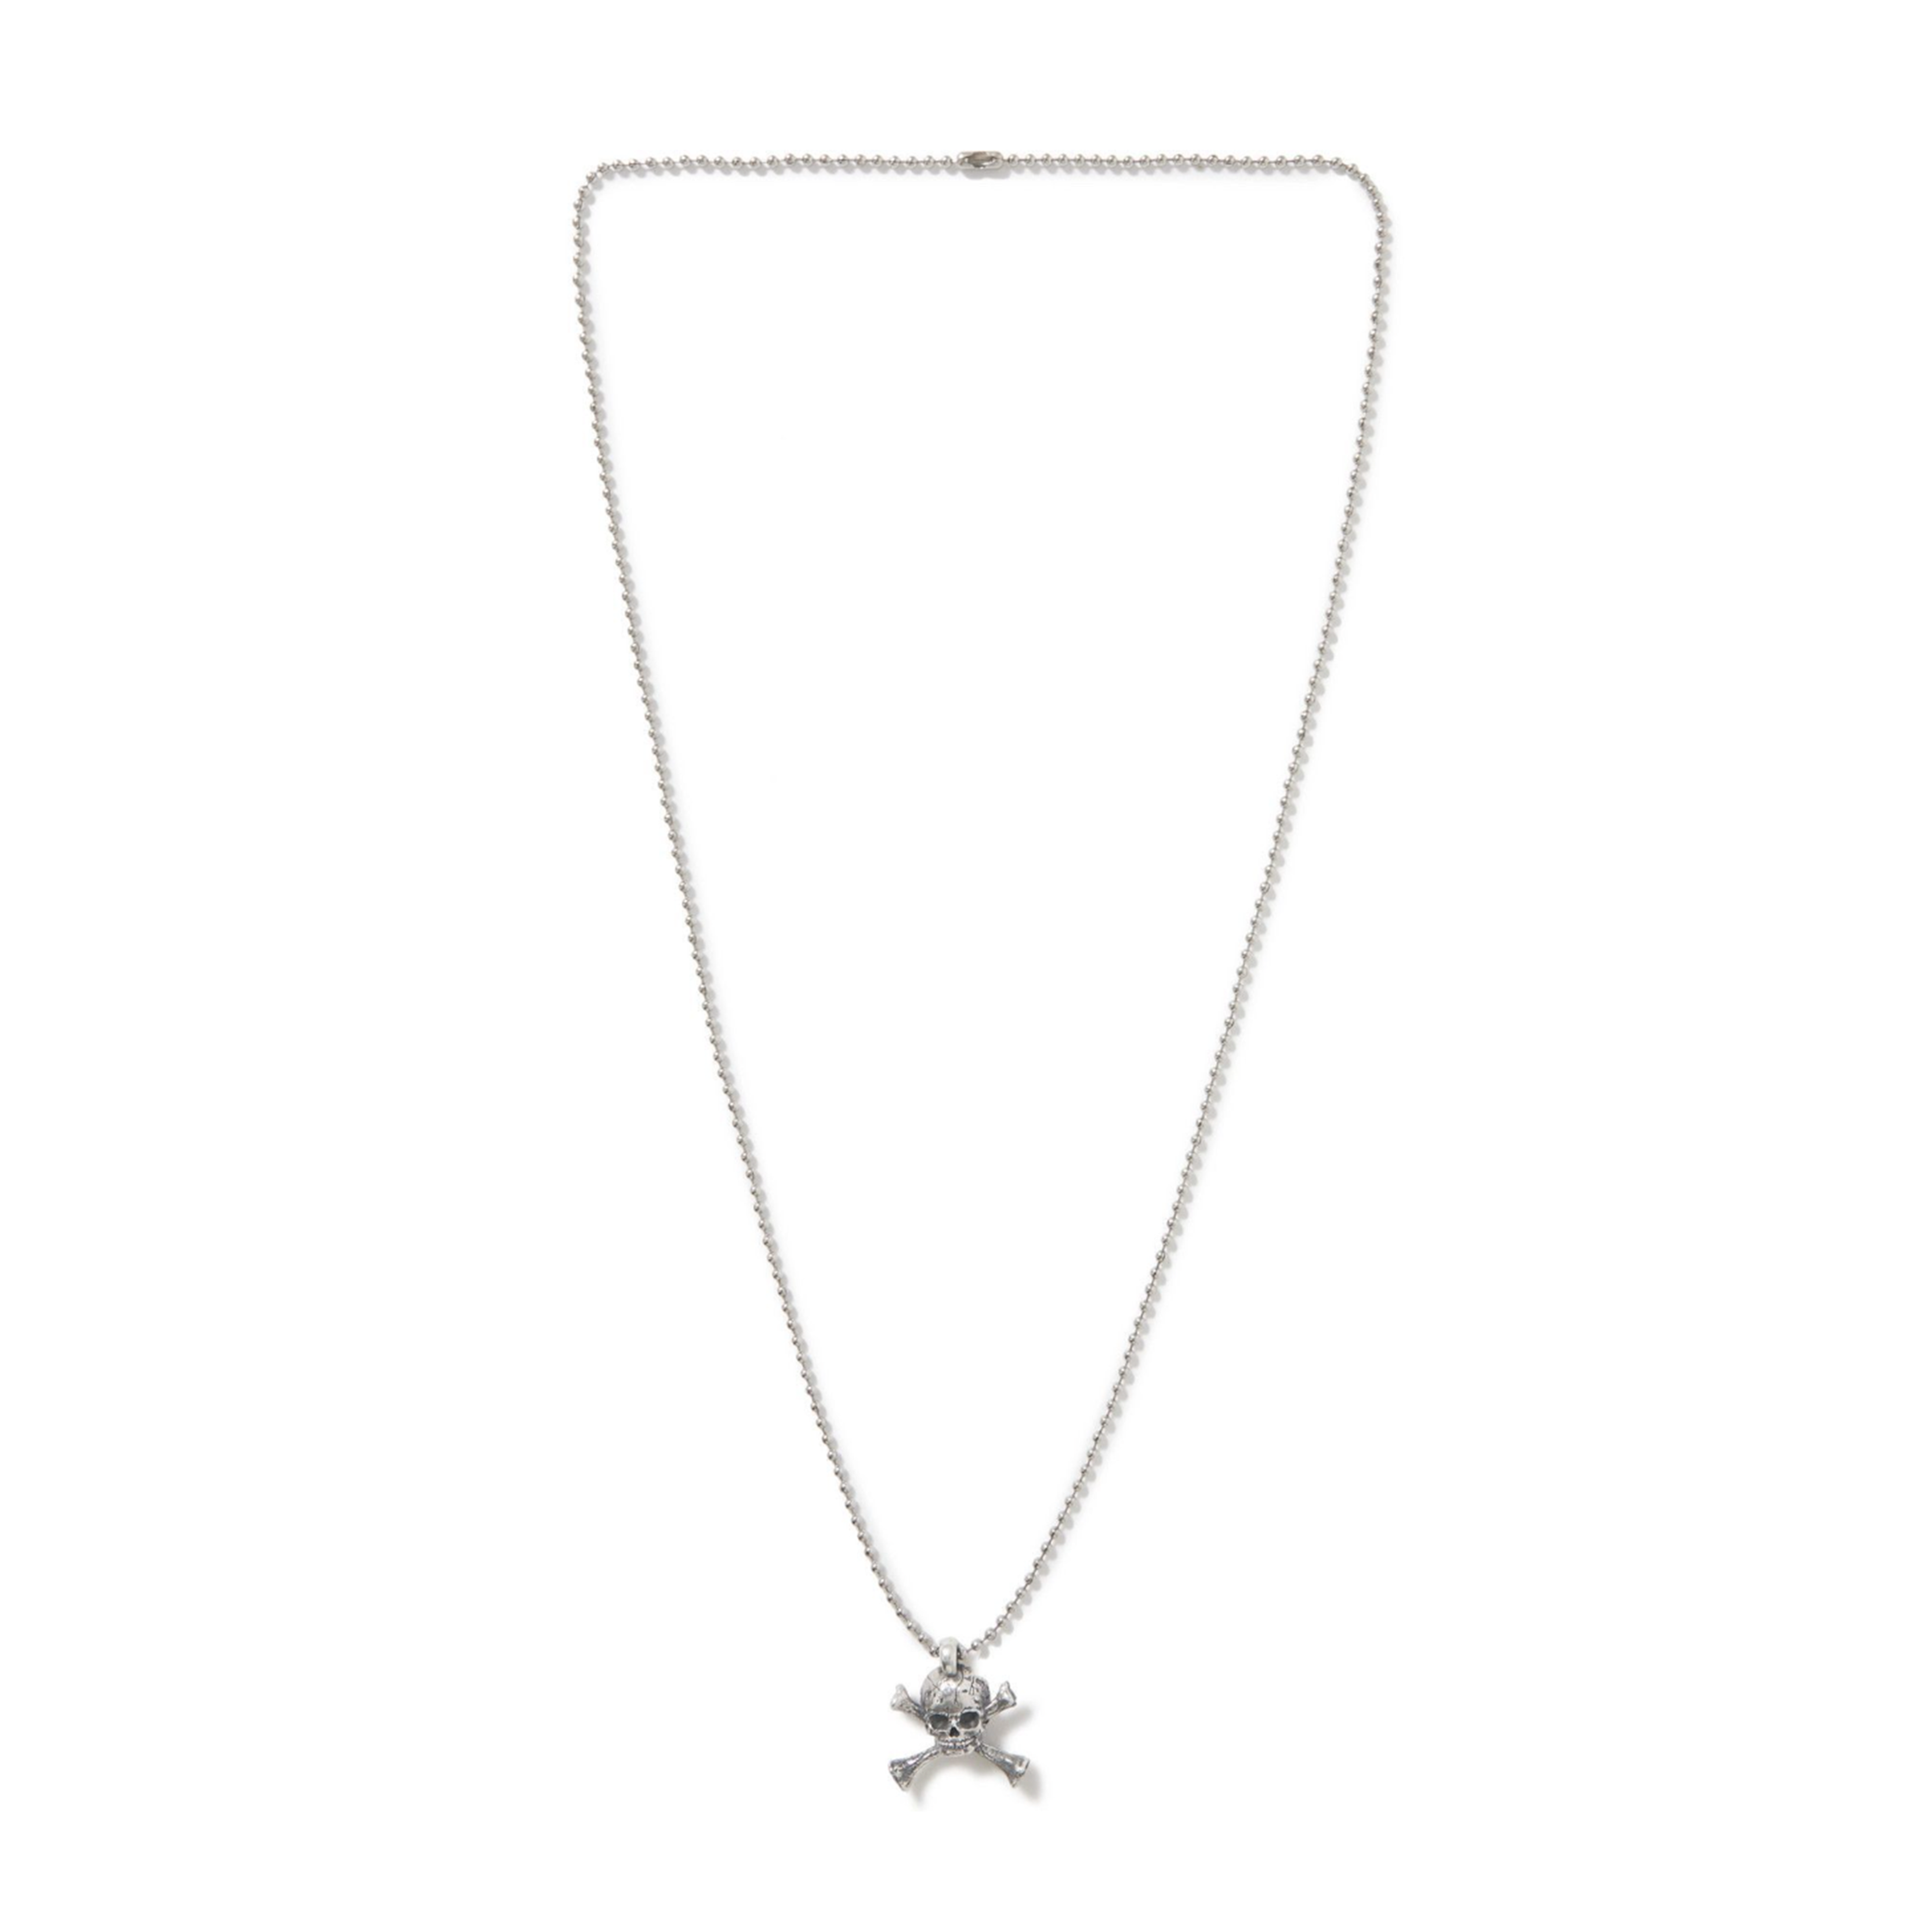 Gallery Dept. Skull and Crossbone Small Silver Pendant Necklace